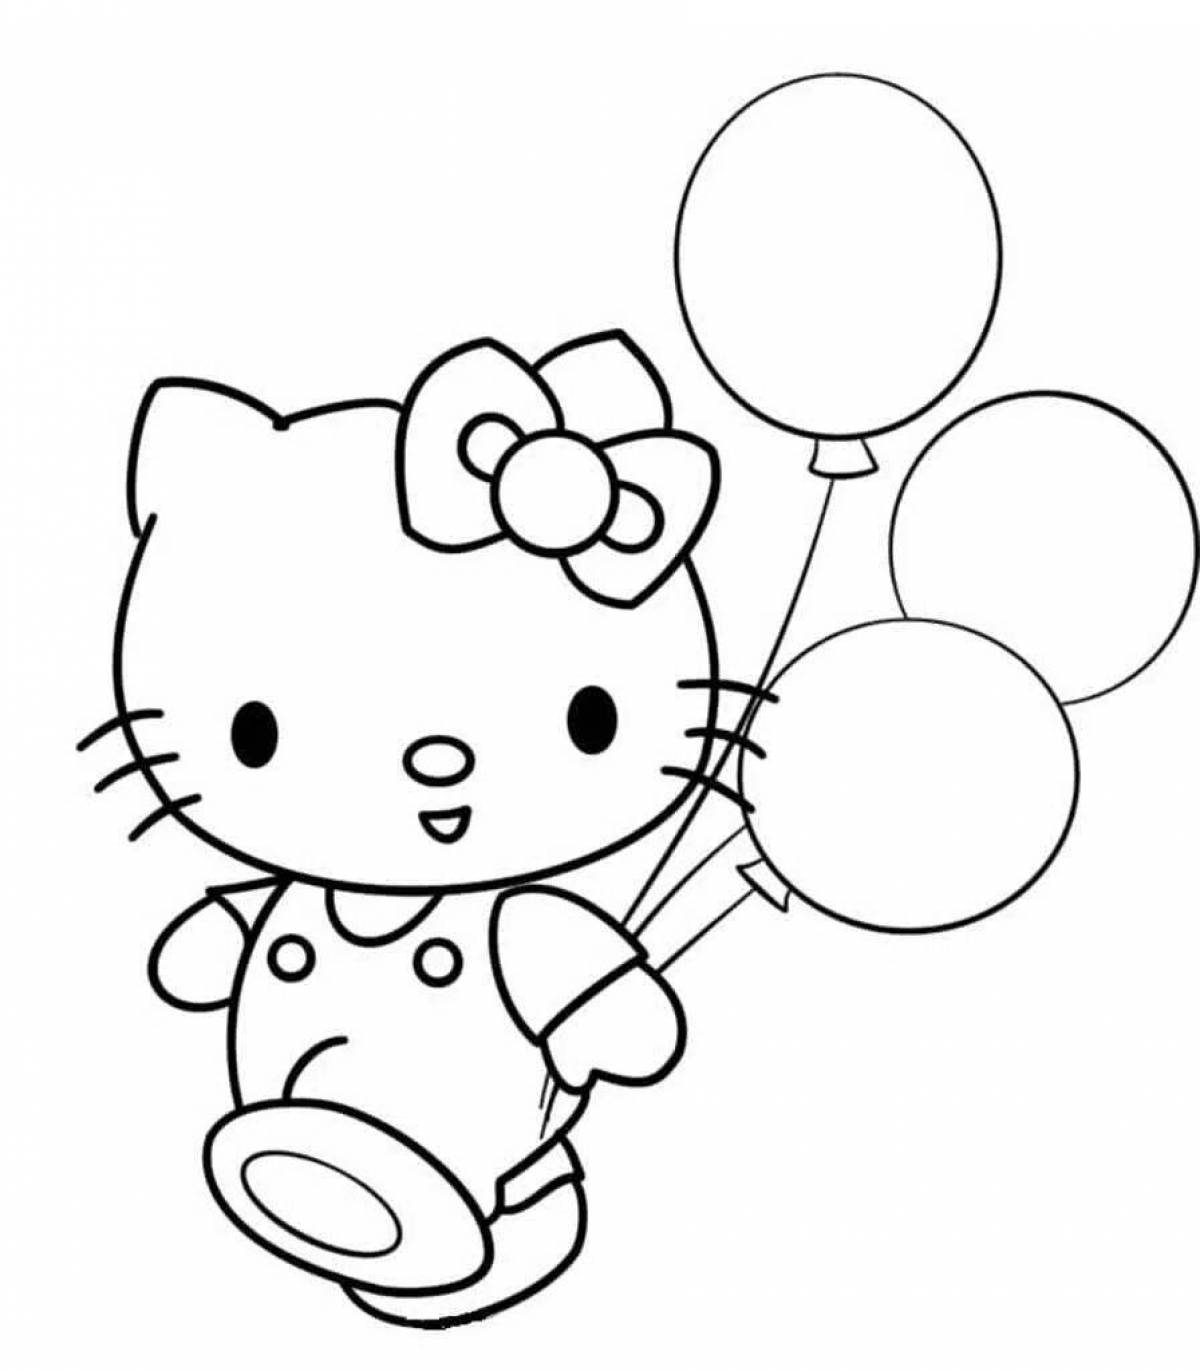 Playful ball coloring page for 4-5 year olds